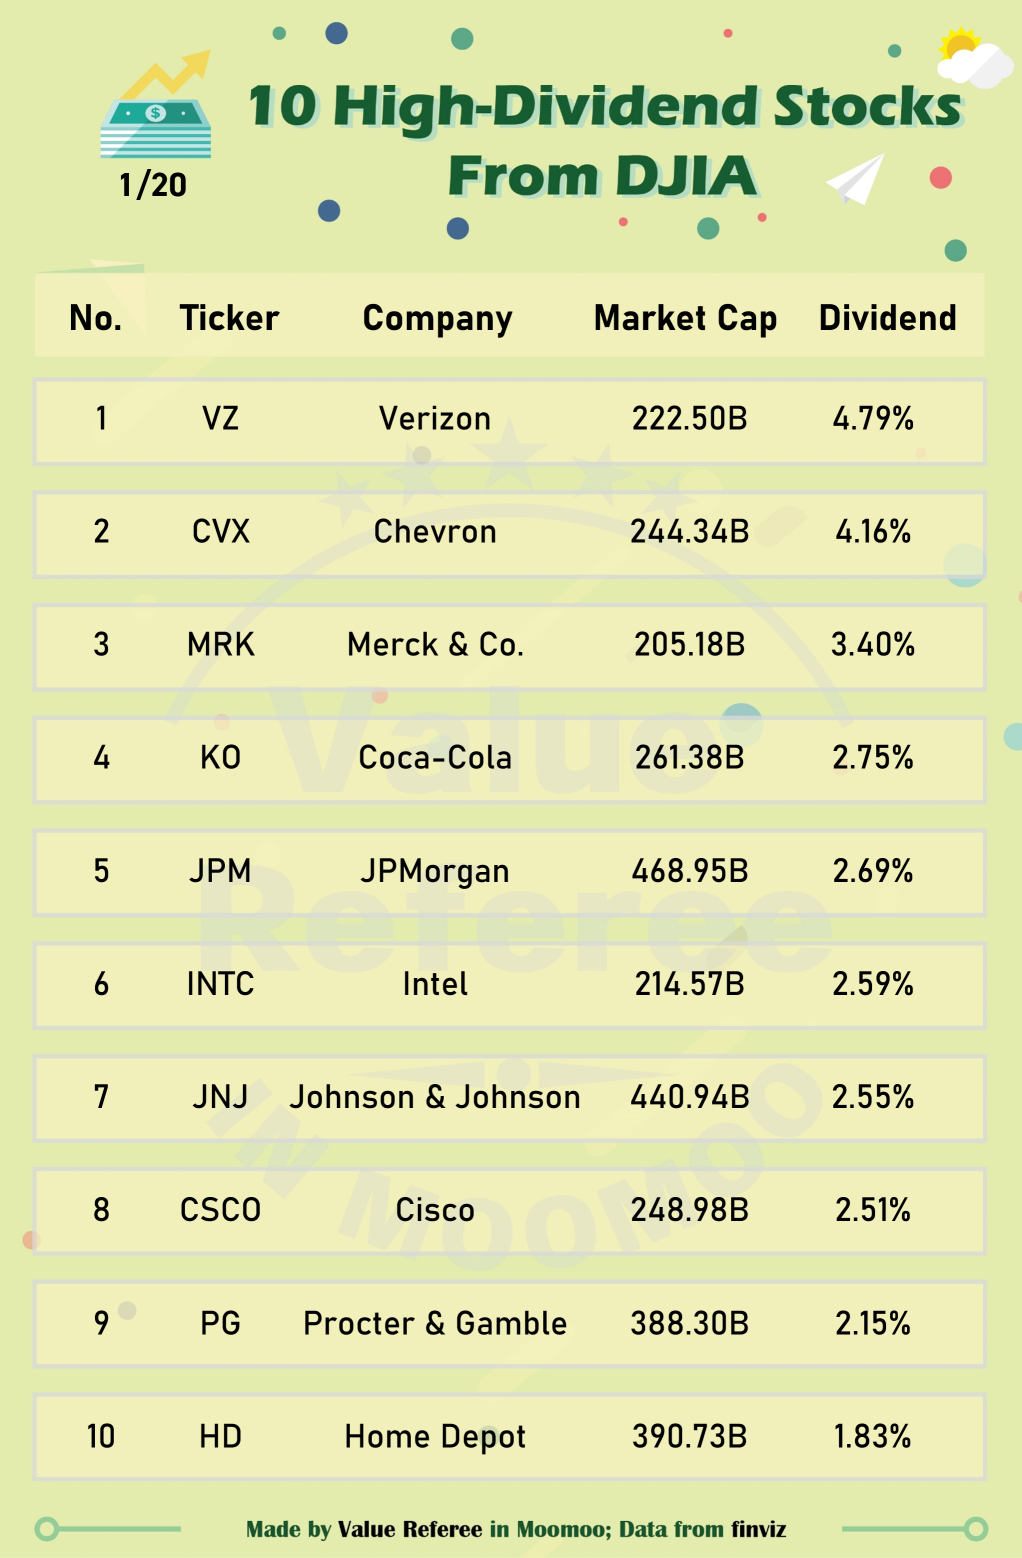 10 high-dividend DJIA stocks to watch (1/20)